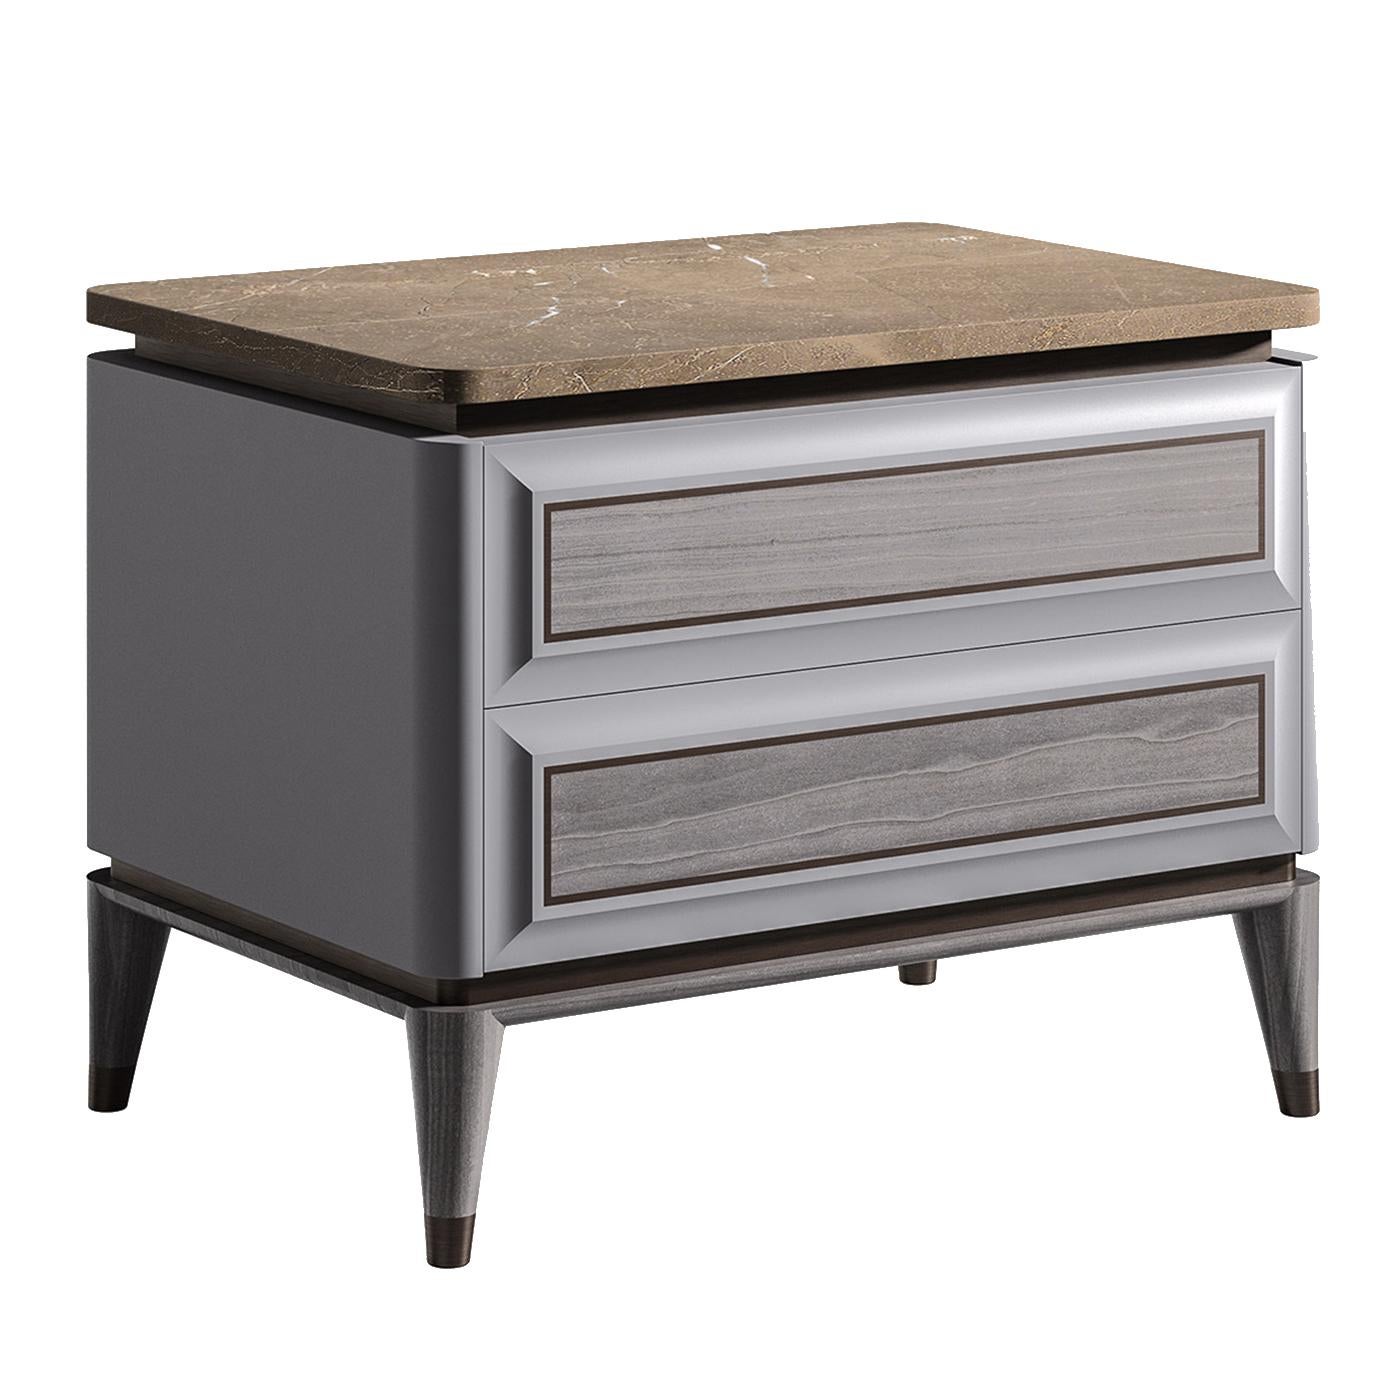 A Classic Silhouette with contemporary flair, this night table features a sleek wood frame with an elegant gray finish and two drawers with raised front panels and brown profiles that recall the metal ferules of the four conical feet. The striking